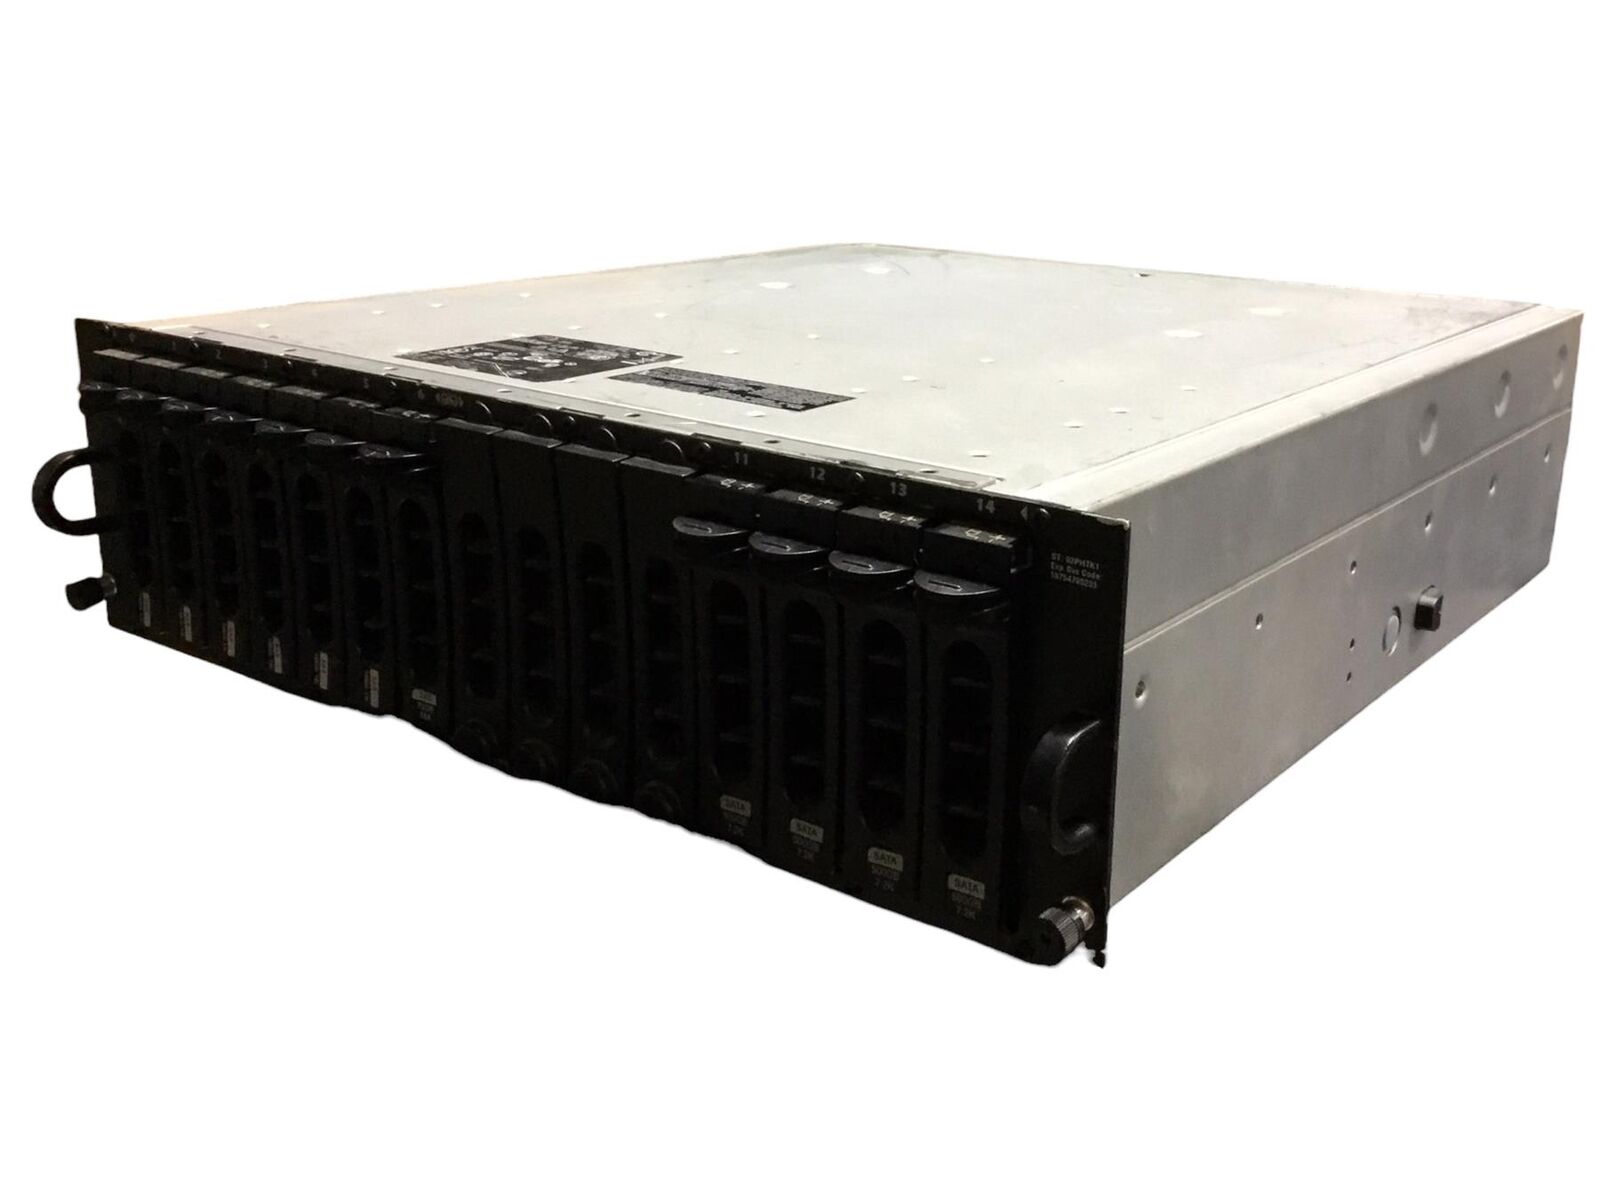 DELL PowerVault MD 1000 15-drive Storage Rack